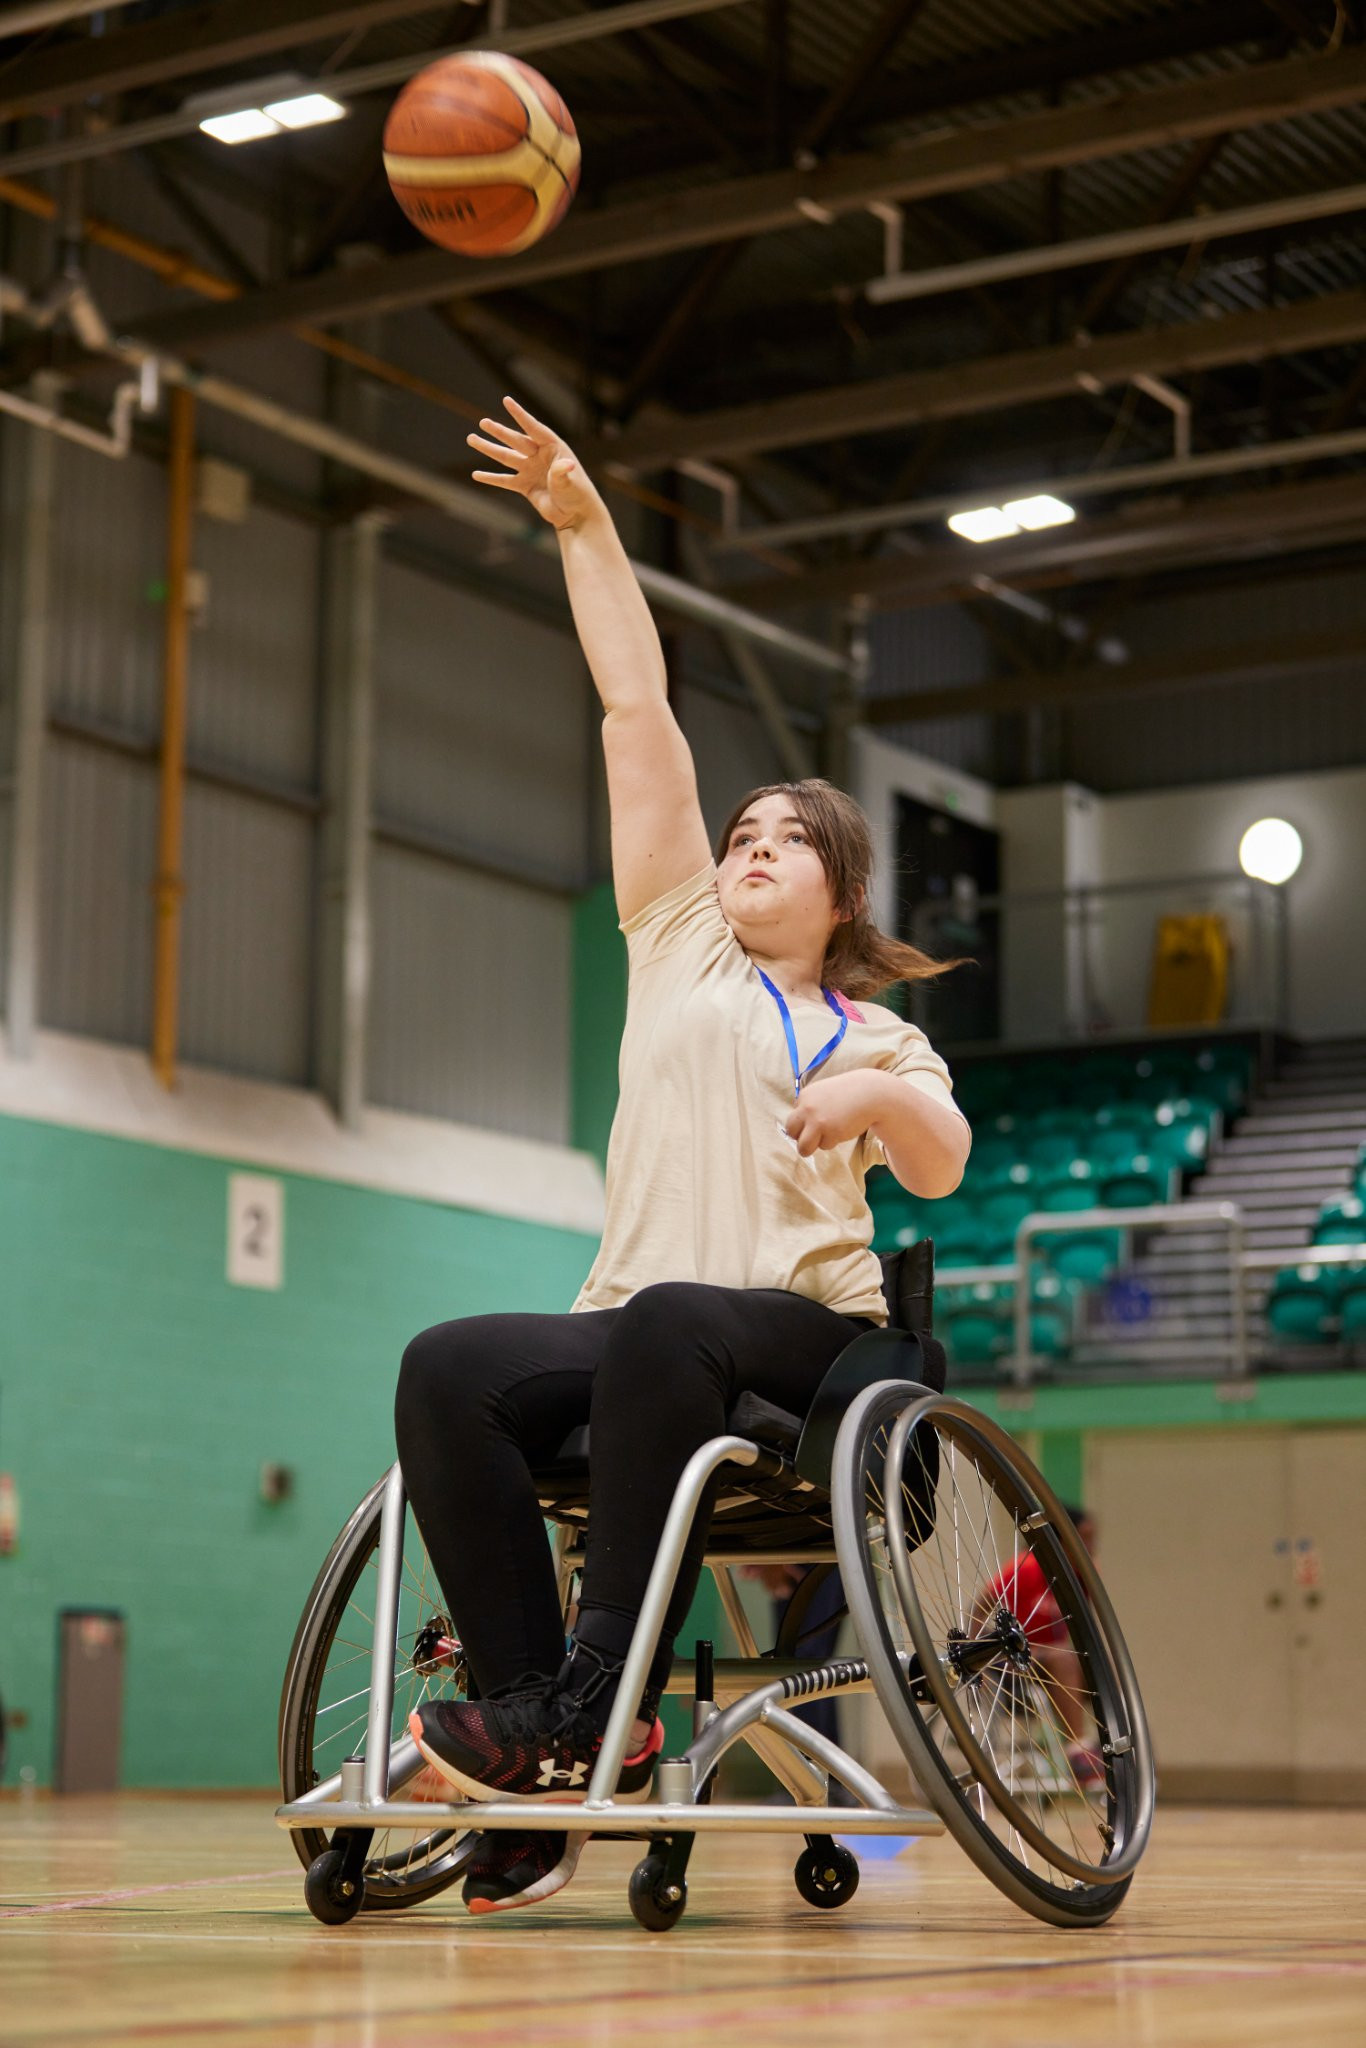 Wheelchair basketball was among the indoor sports on offer during the National Junior Games at the Stoke Mandeville Stadium ©Roger Bool Photography